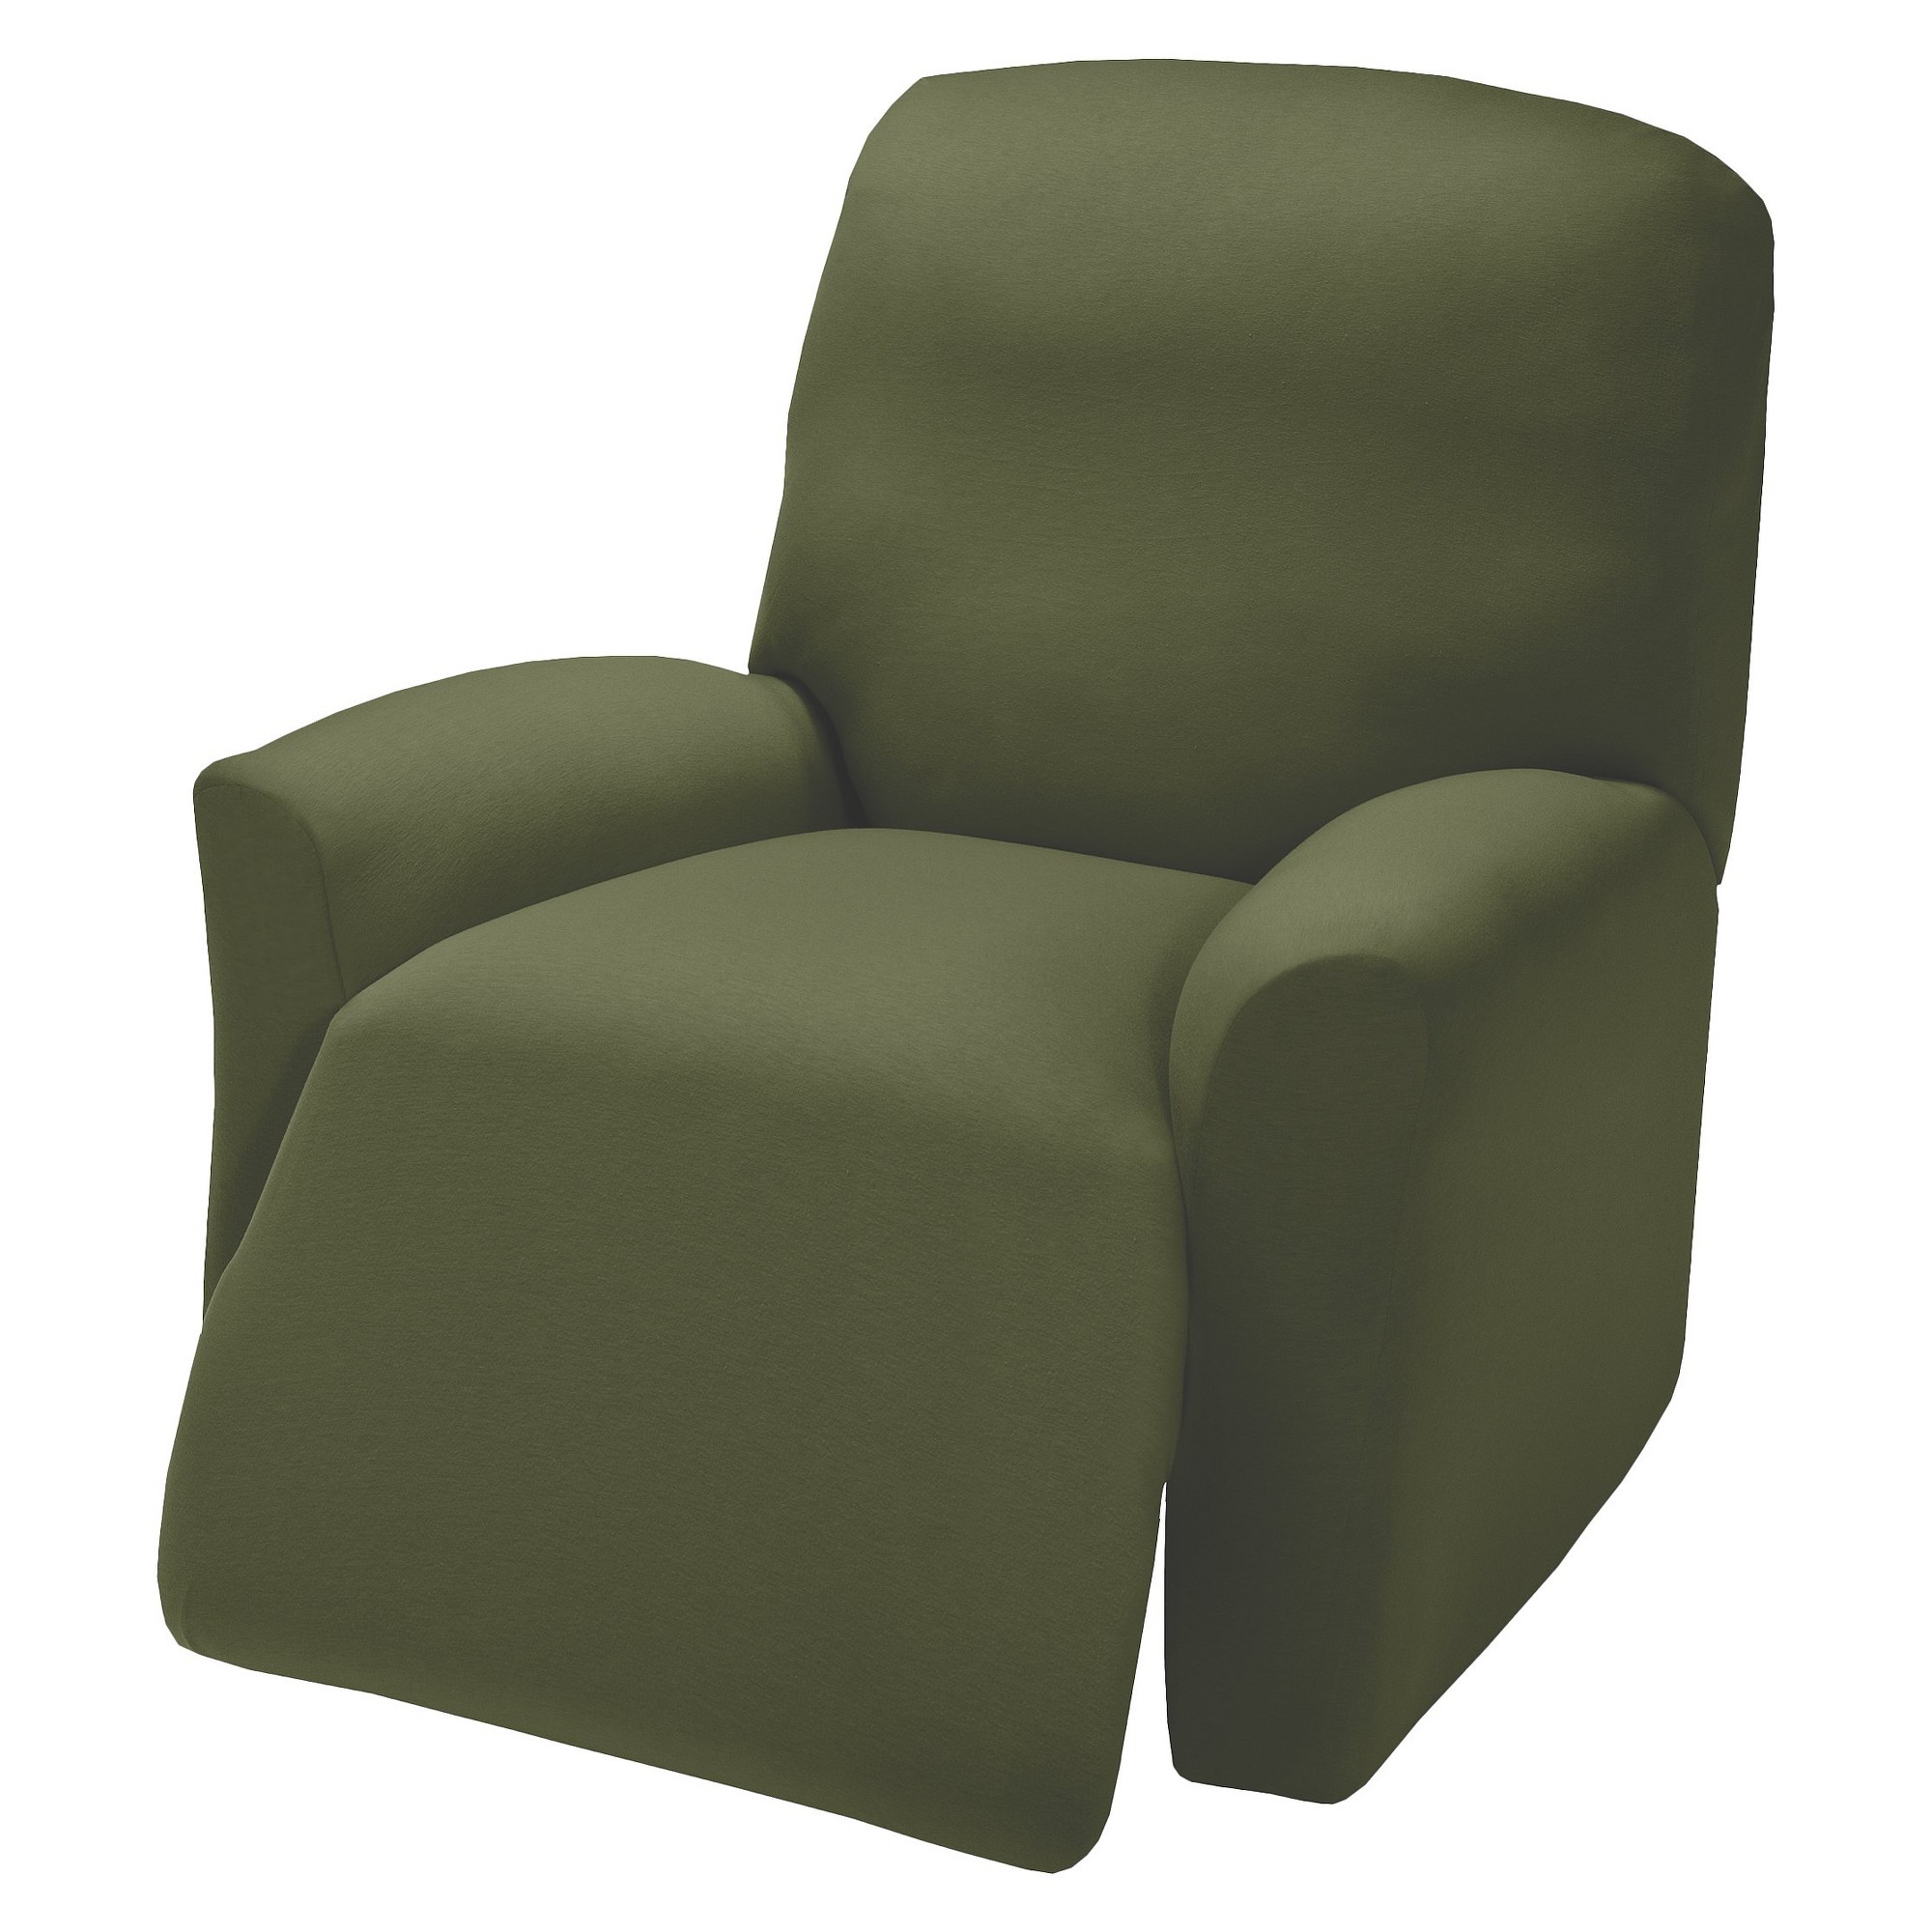 Forest Jersey Large Recliner Slipcover - Madison Industries, Green